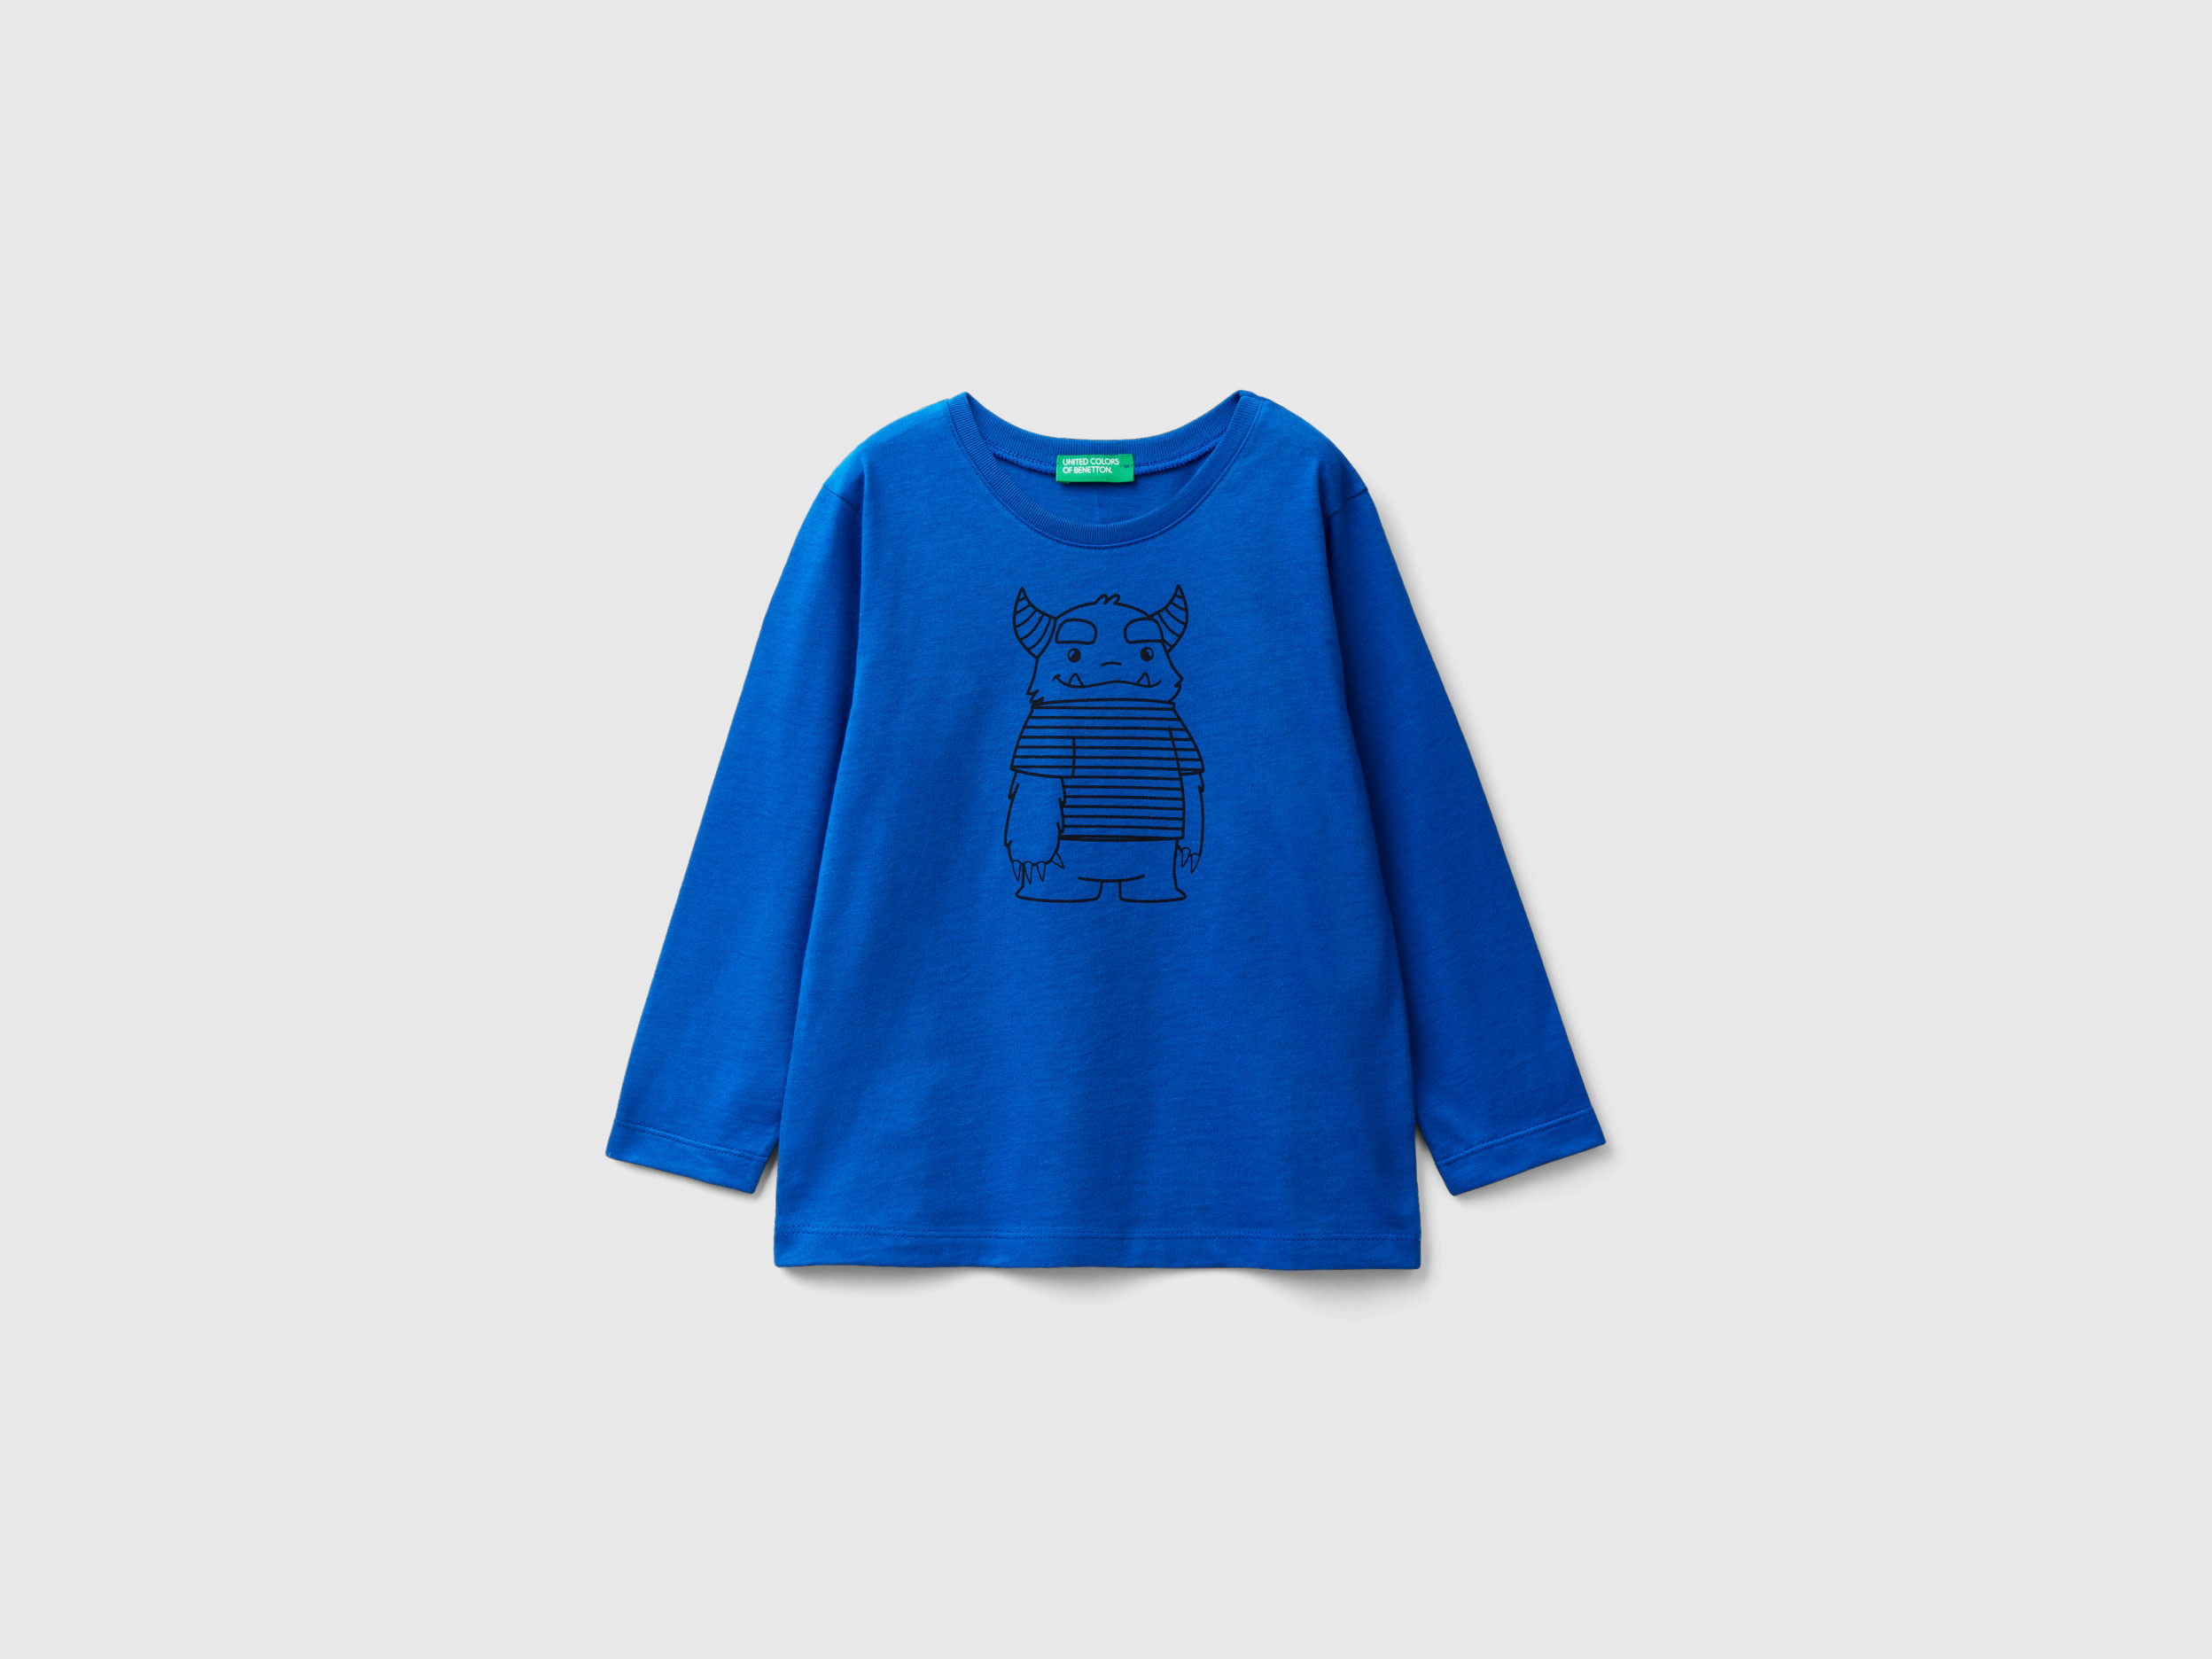 Benetton, Sweater In Cotton With Print, size 12-18, Bright Blue, Kids